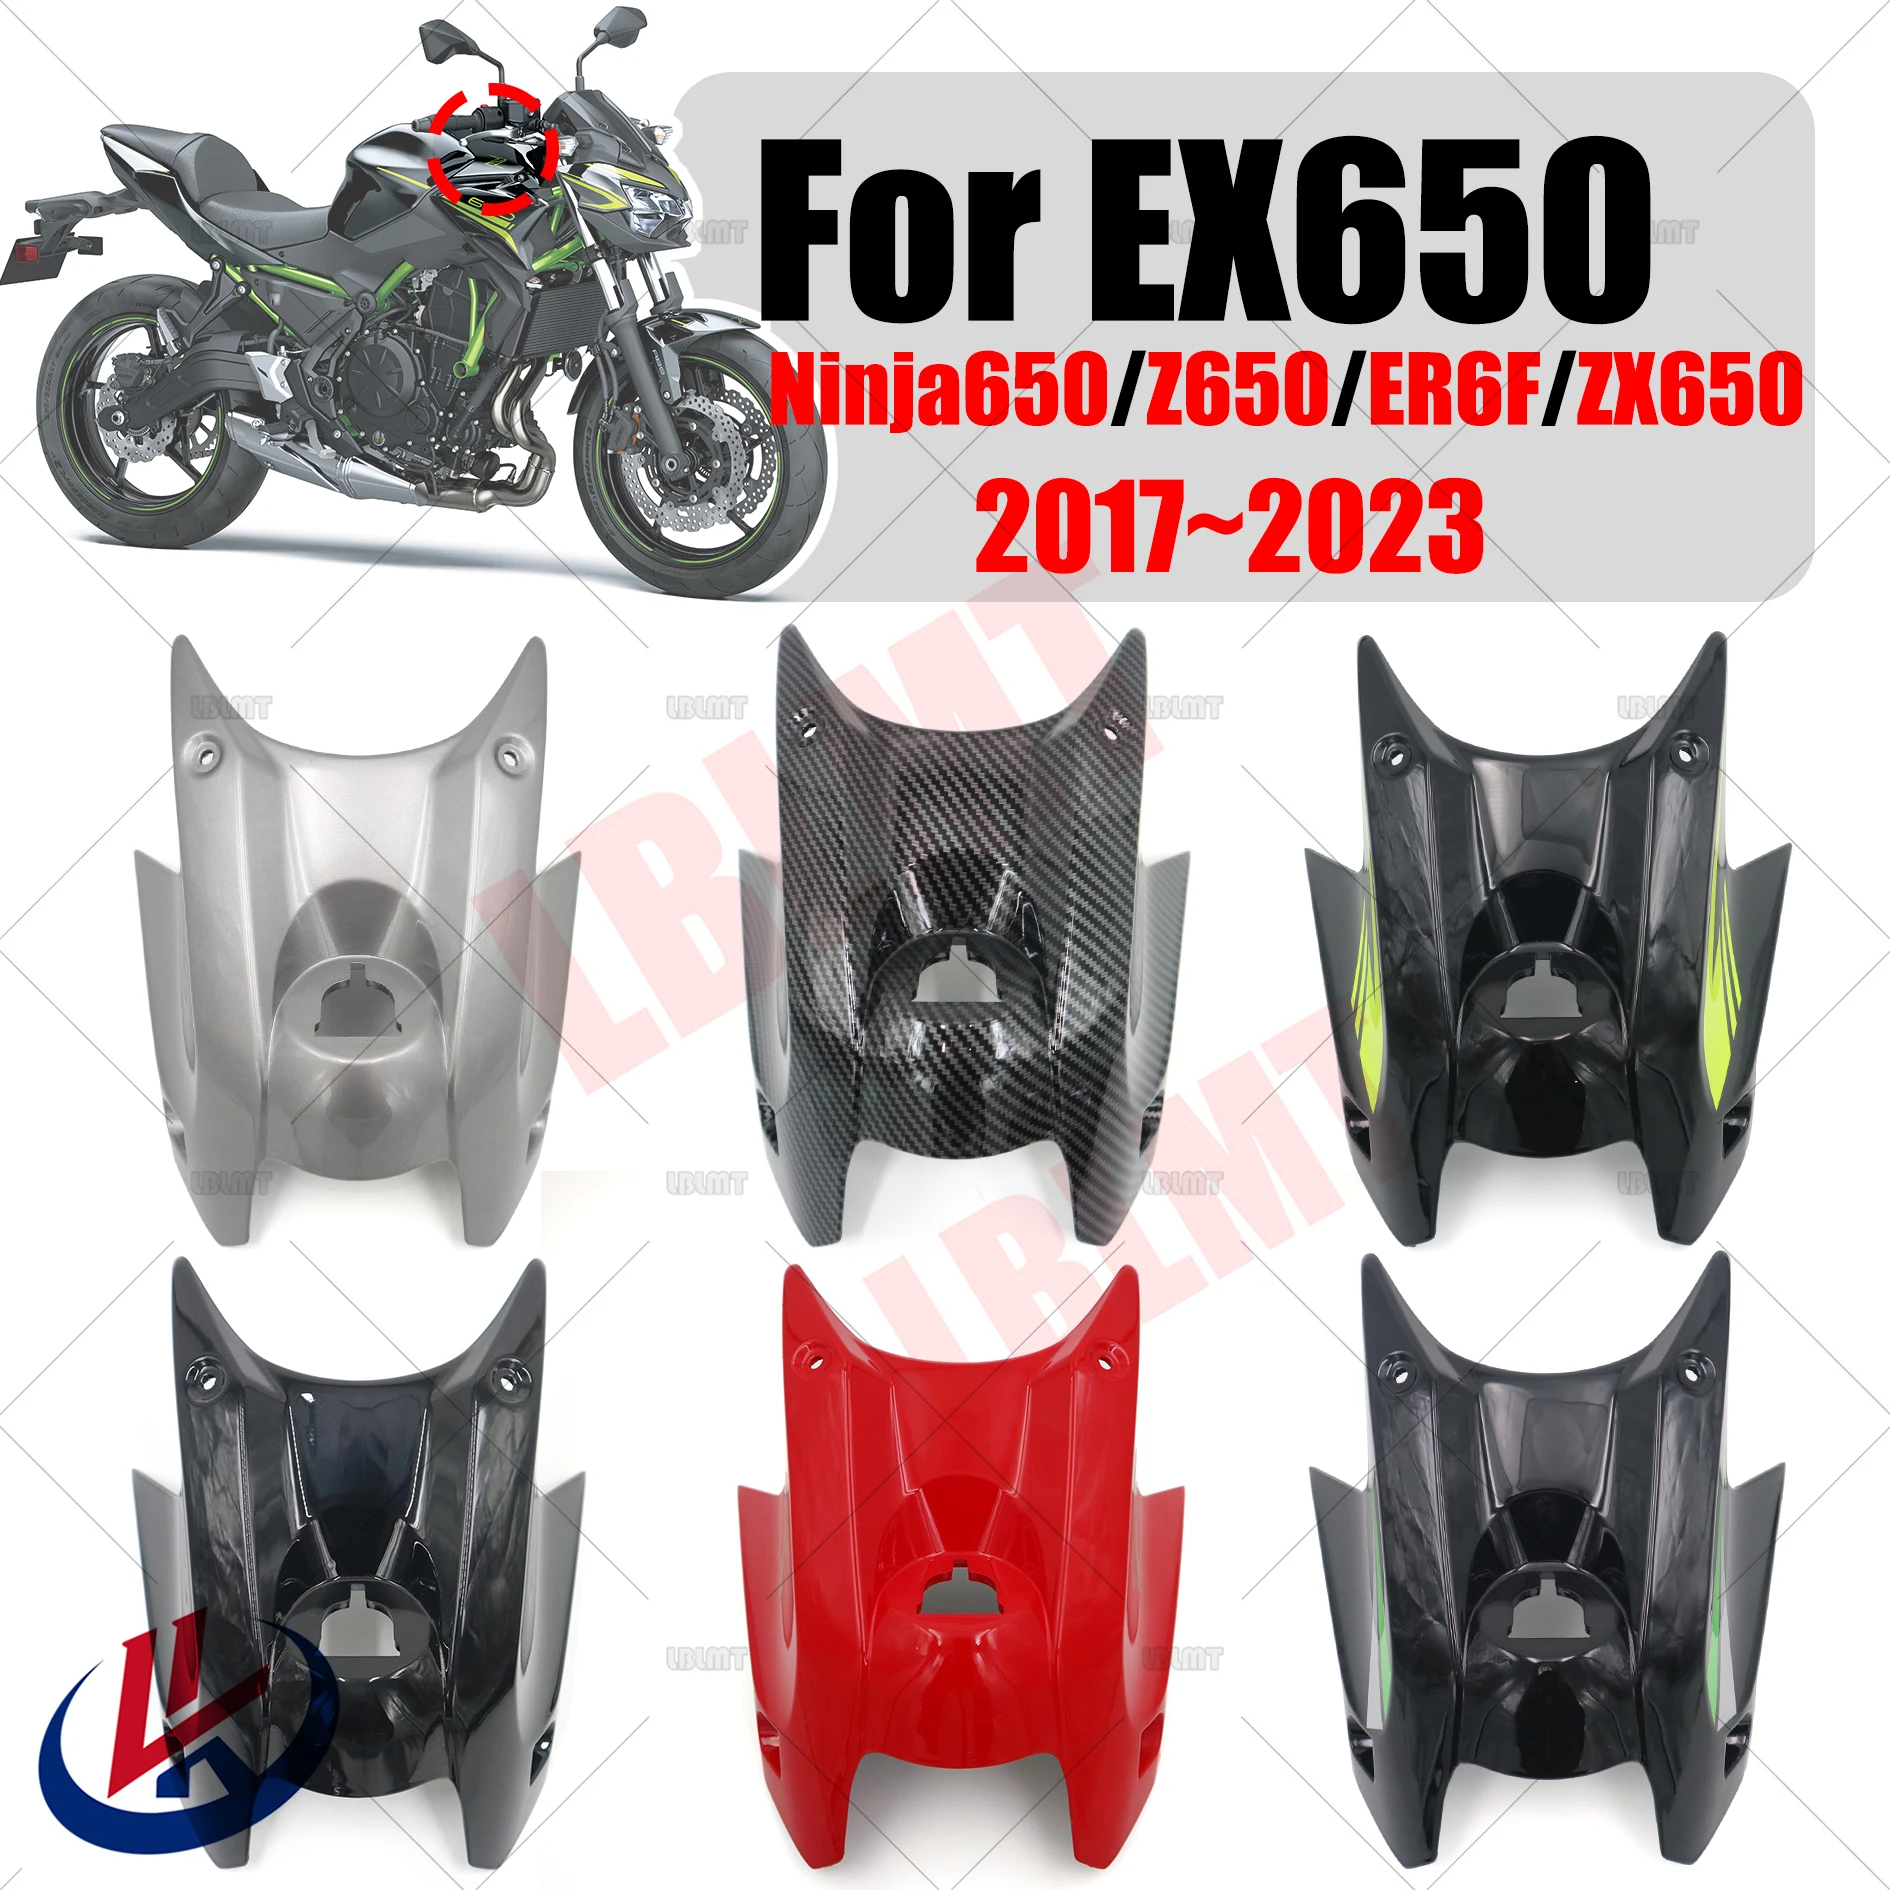 

Motorcycle Gas Tank Cover Guard Accessories For Kawasaki Z650 ZX650 EX650 Ninja 650 2017-2023 Protection Oil Fuel Fairing Cowl